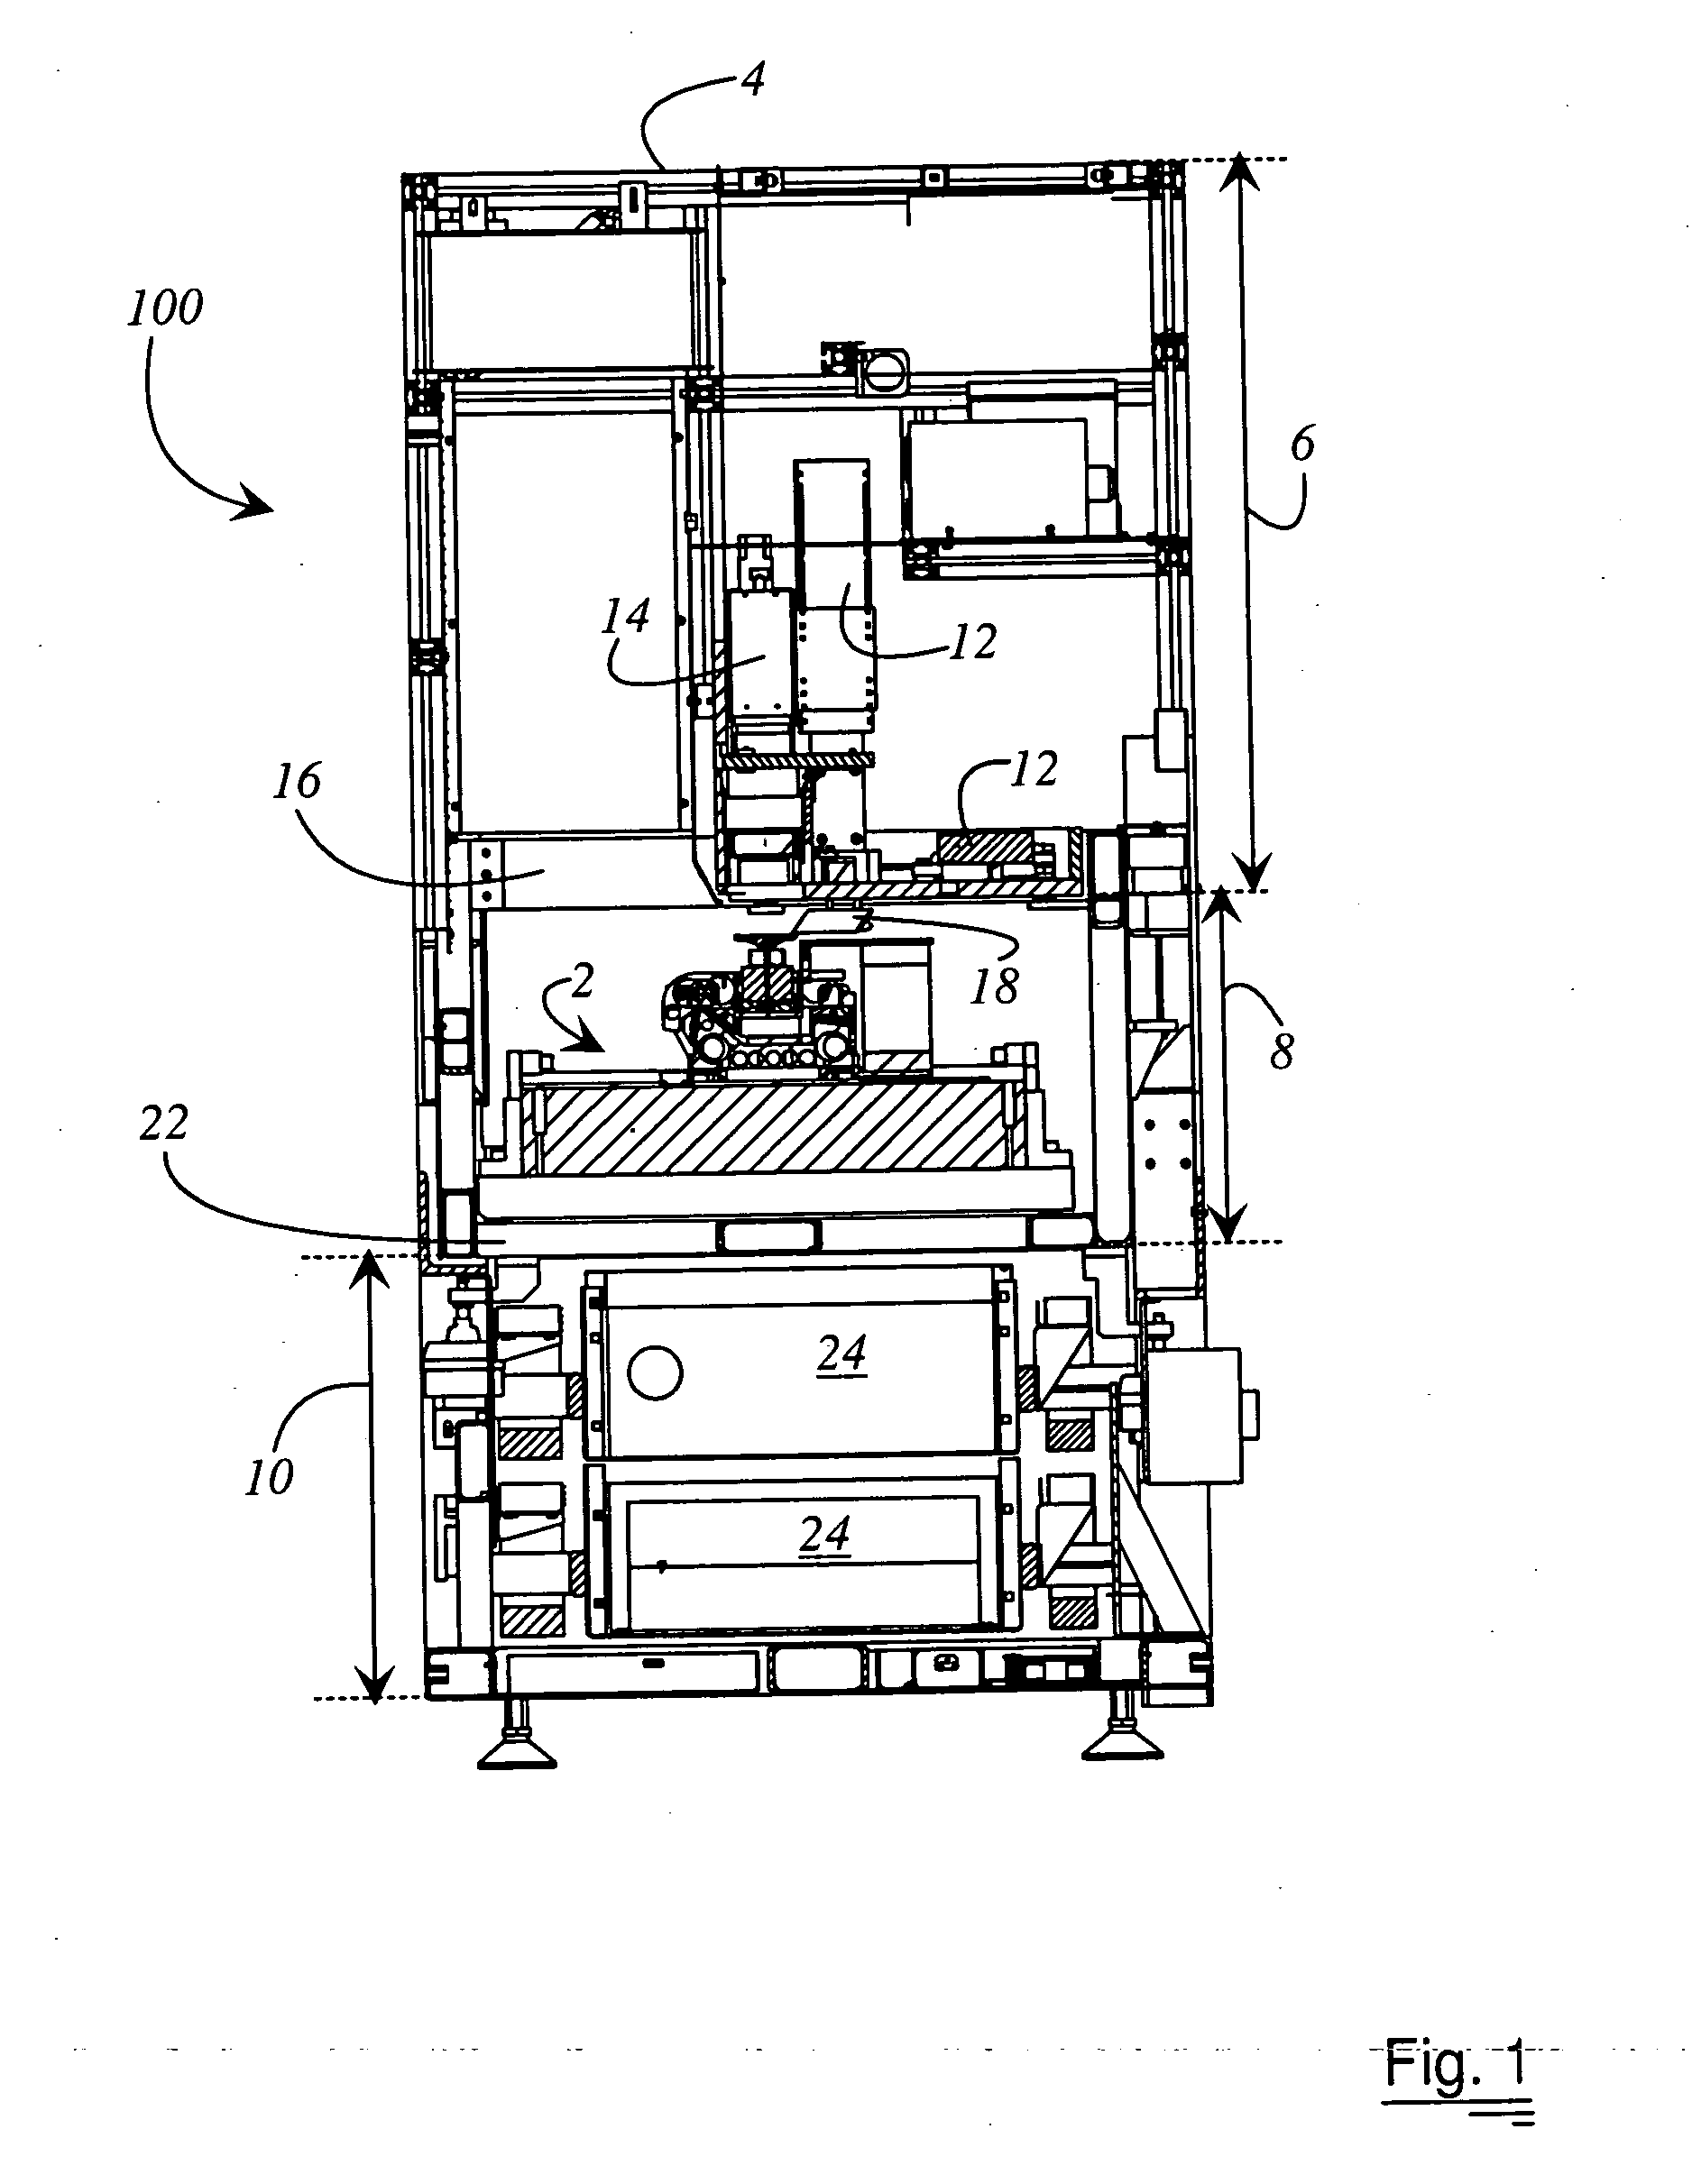 Method for inspection of a wafer